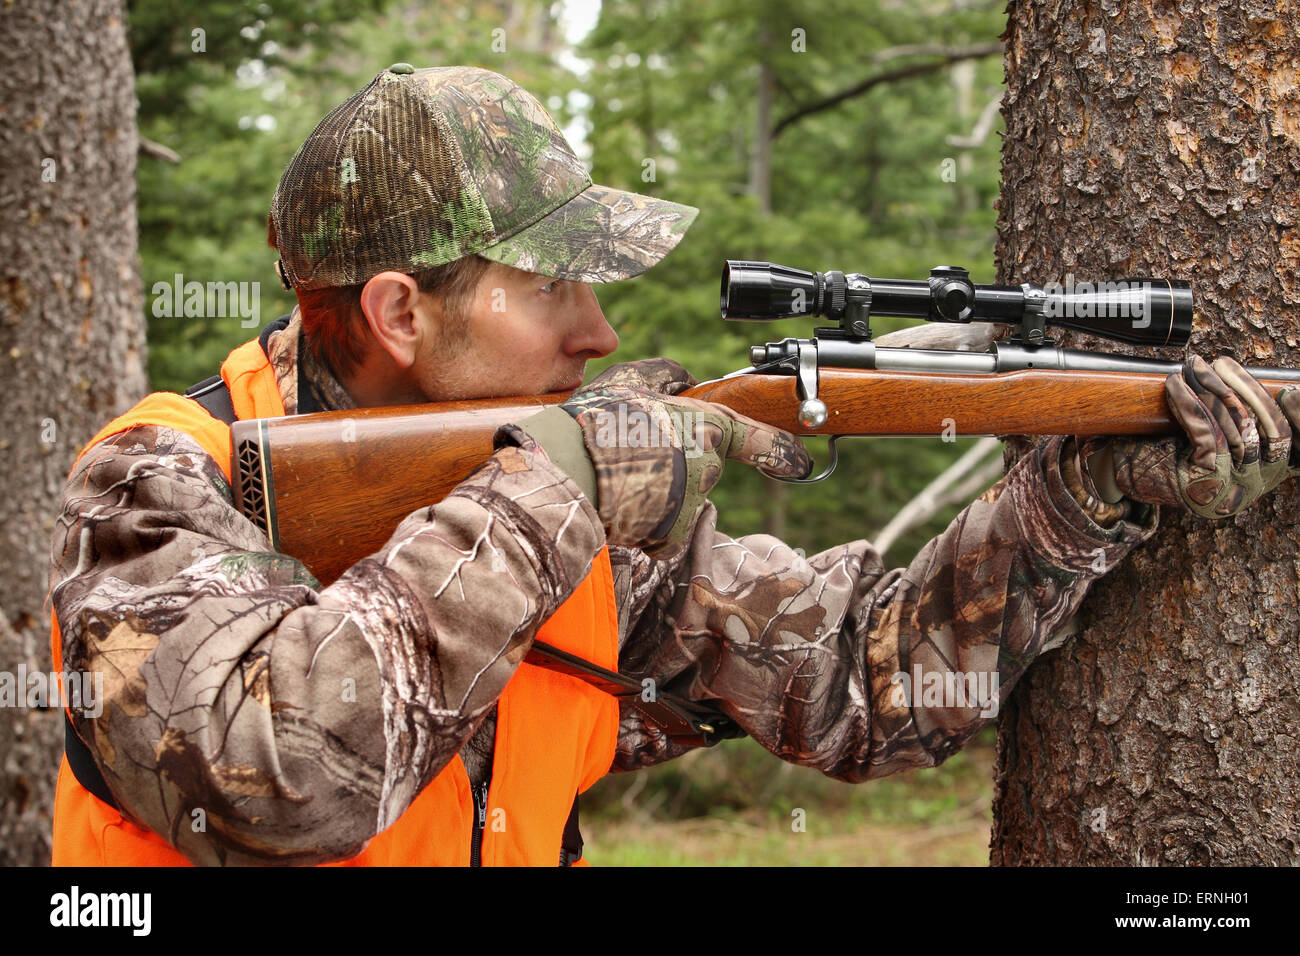 adult hunter aiming deer rifle in forest close-up Stock Photo